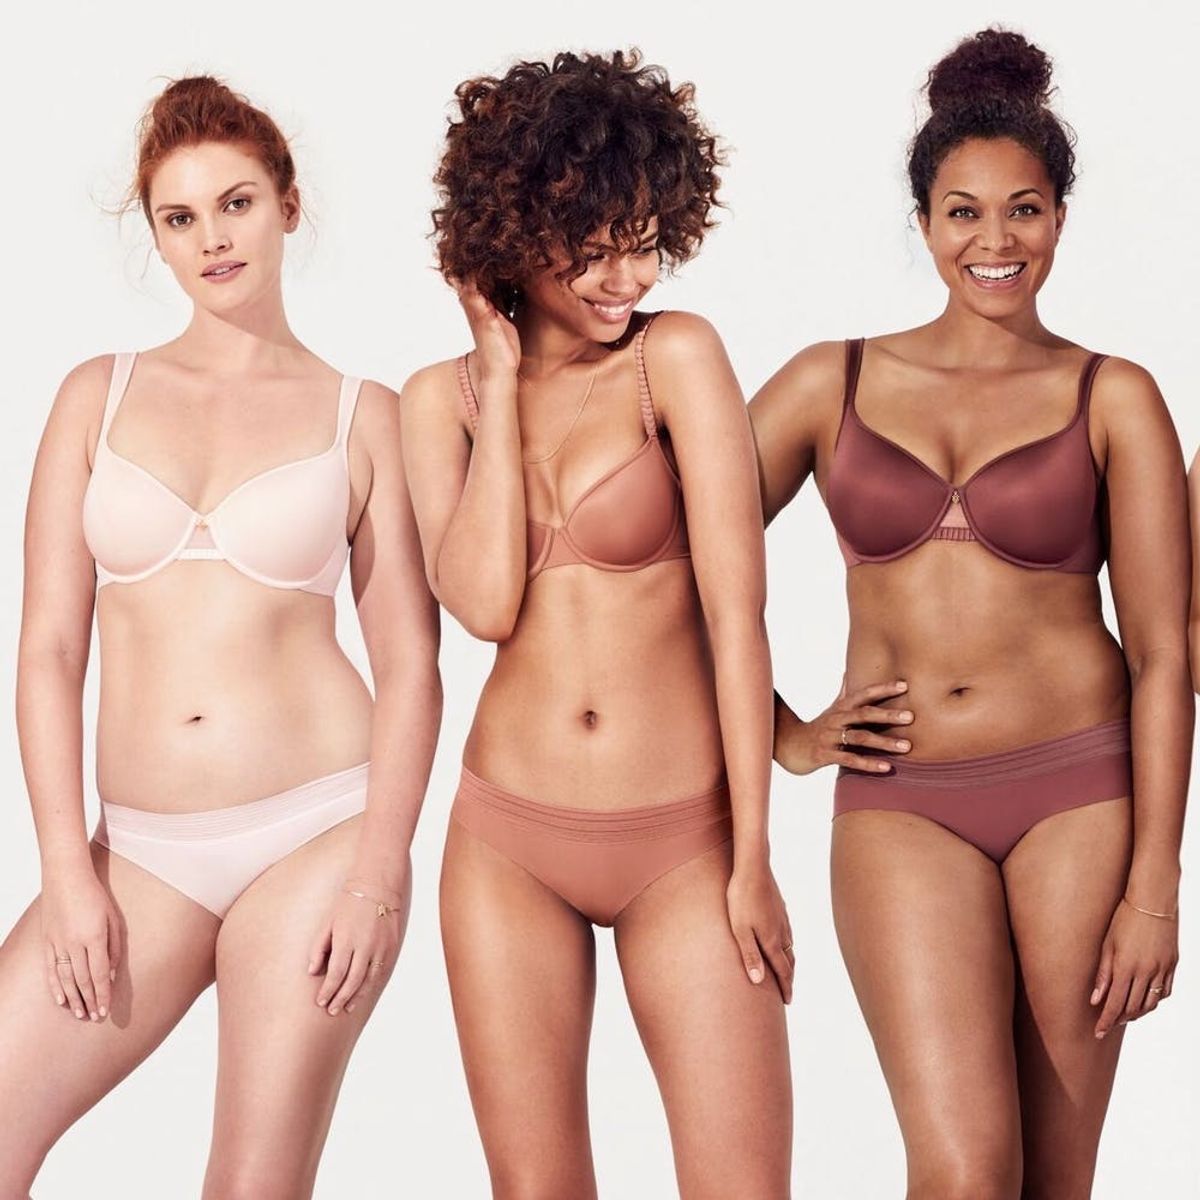 ThirdLove Is Adding 24 New Bra Sizes and the Waitlist Already Has 1.3 Million People